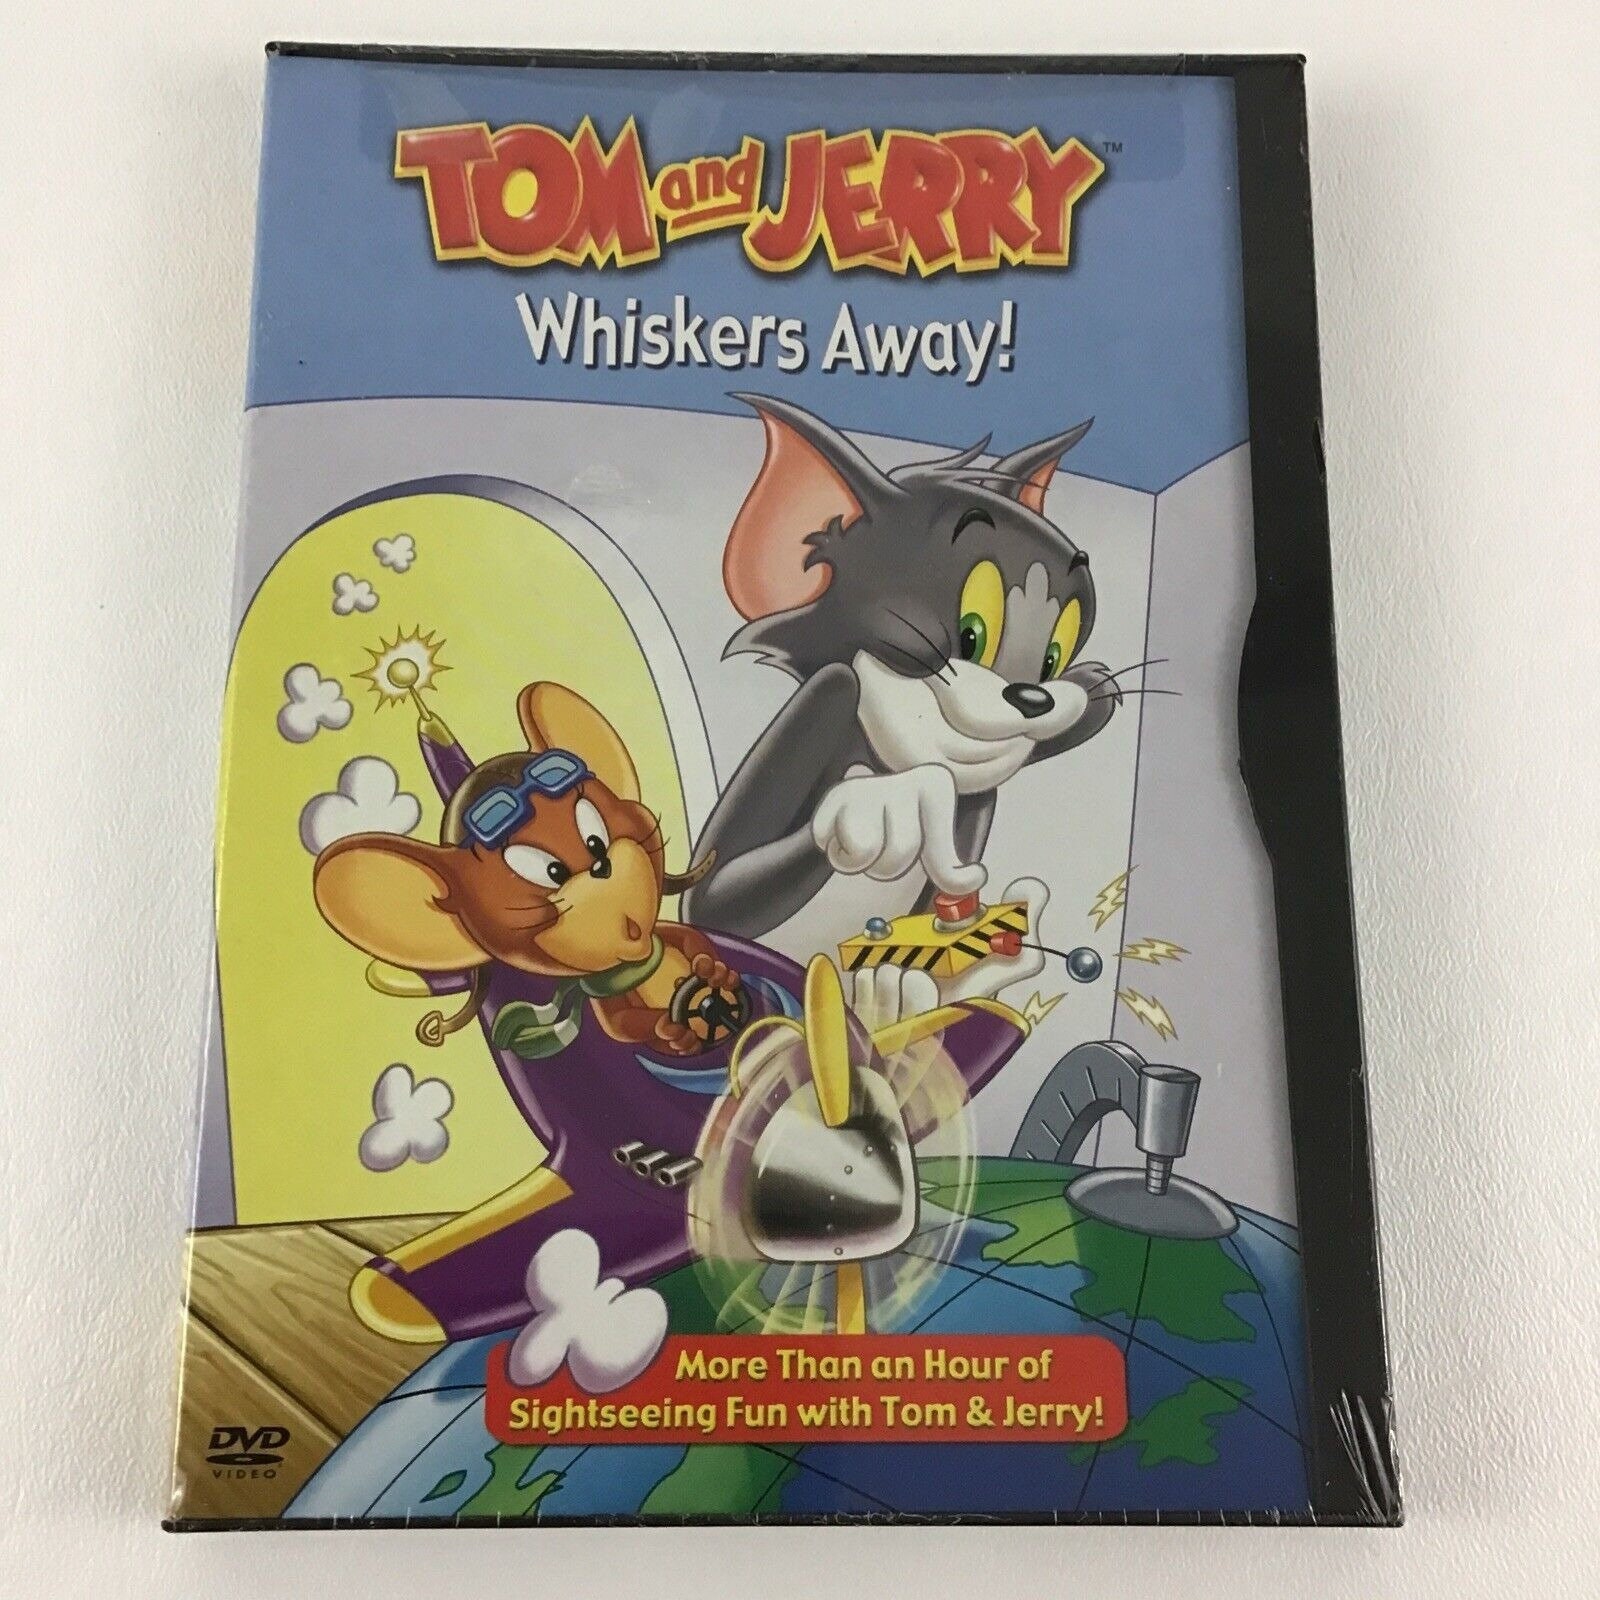 Tom & Jerry Whiskers Away DVD Special Features Animated - Etsy Hong Kong